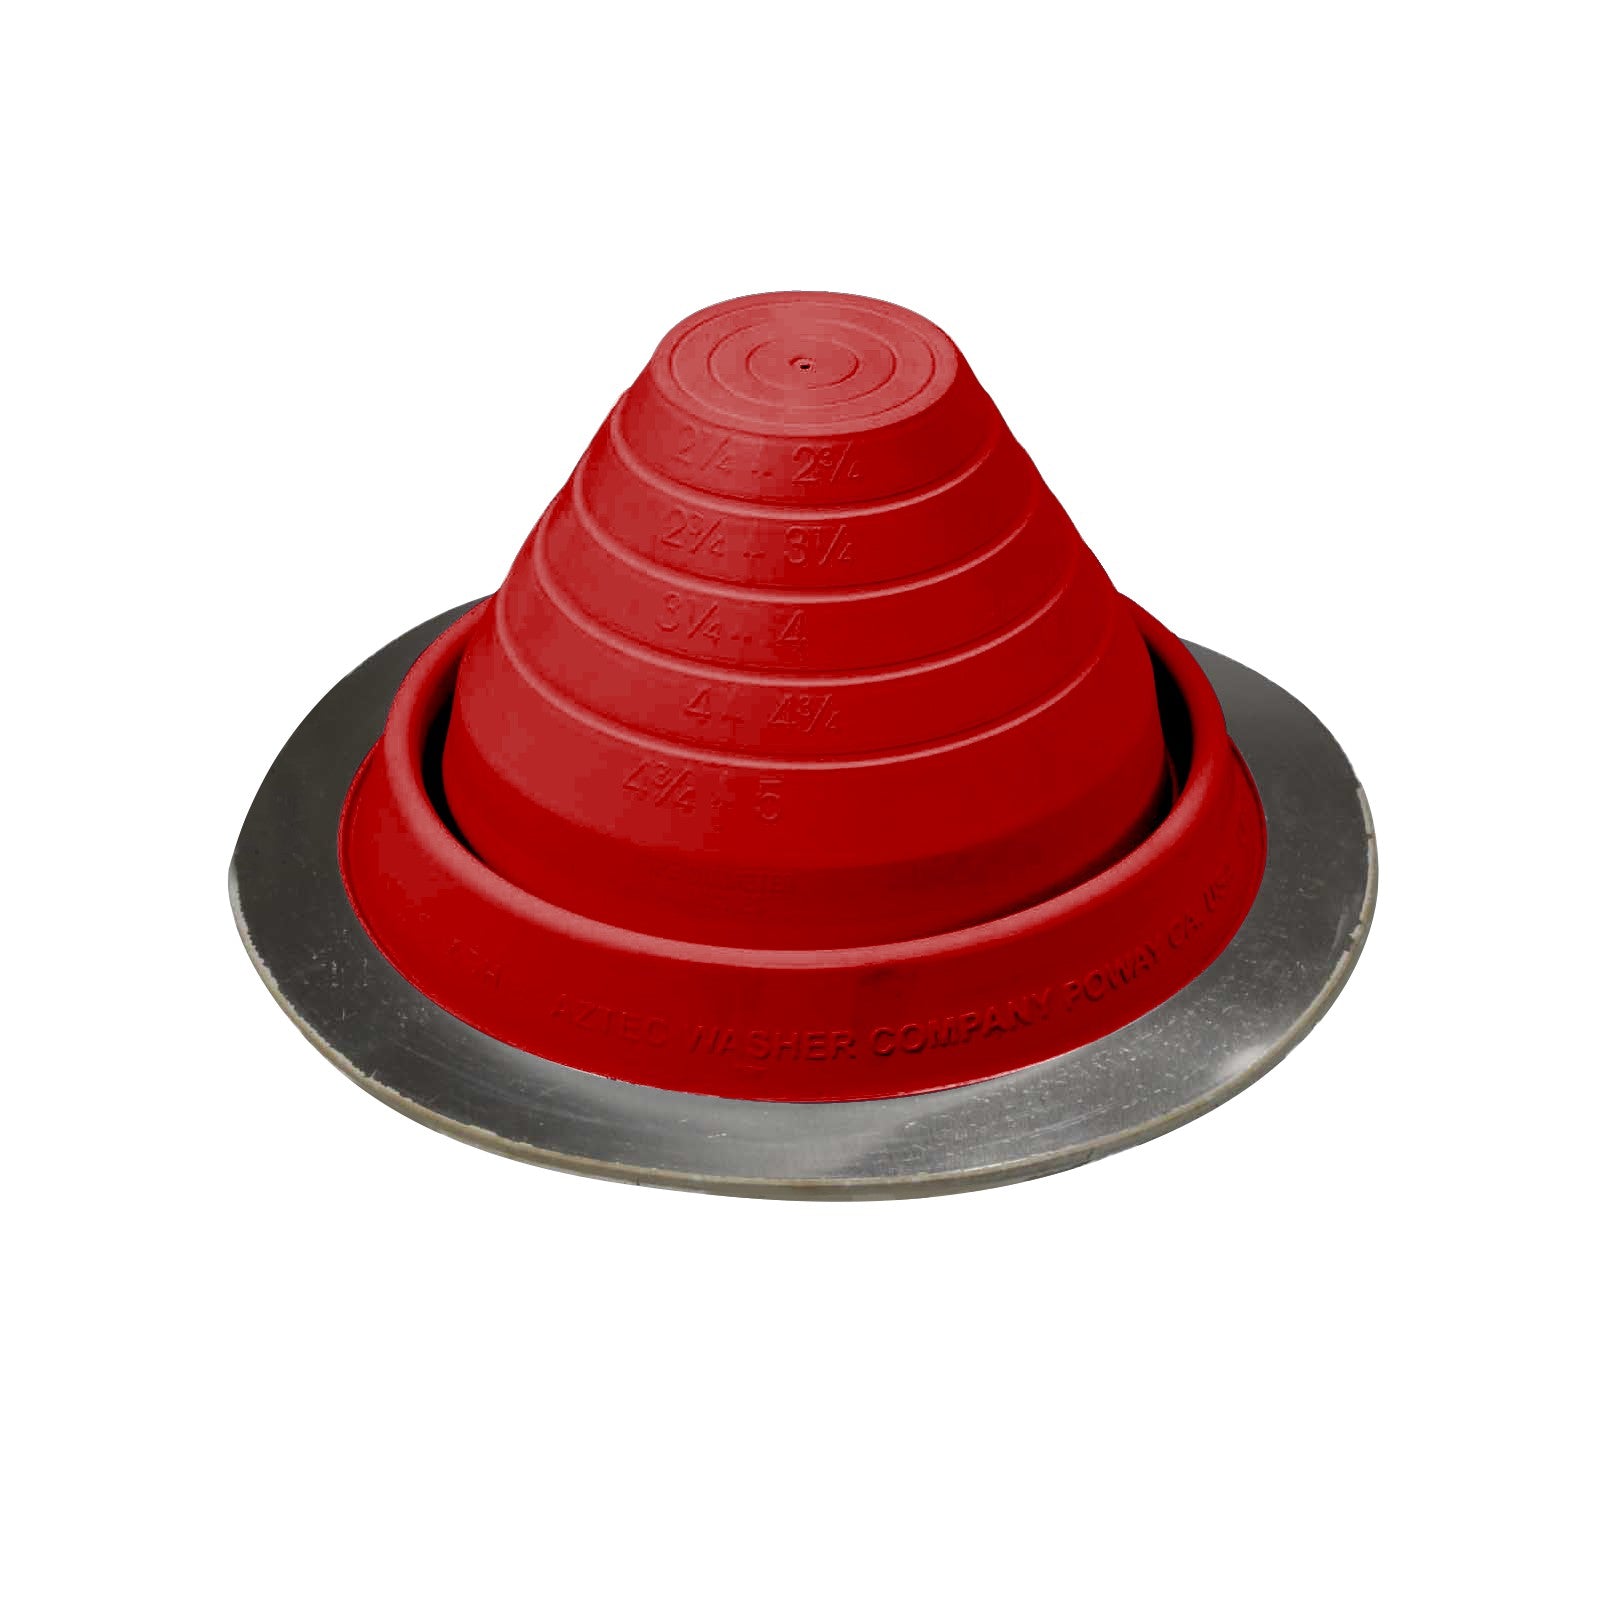 #3 Roofjack Round EPDM Pipe Flashing Boot Bright Red